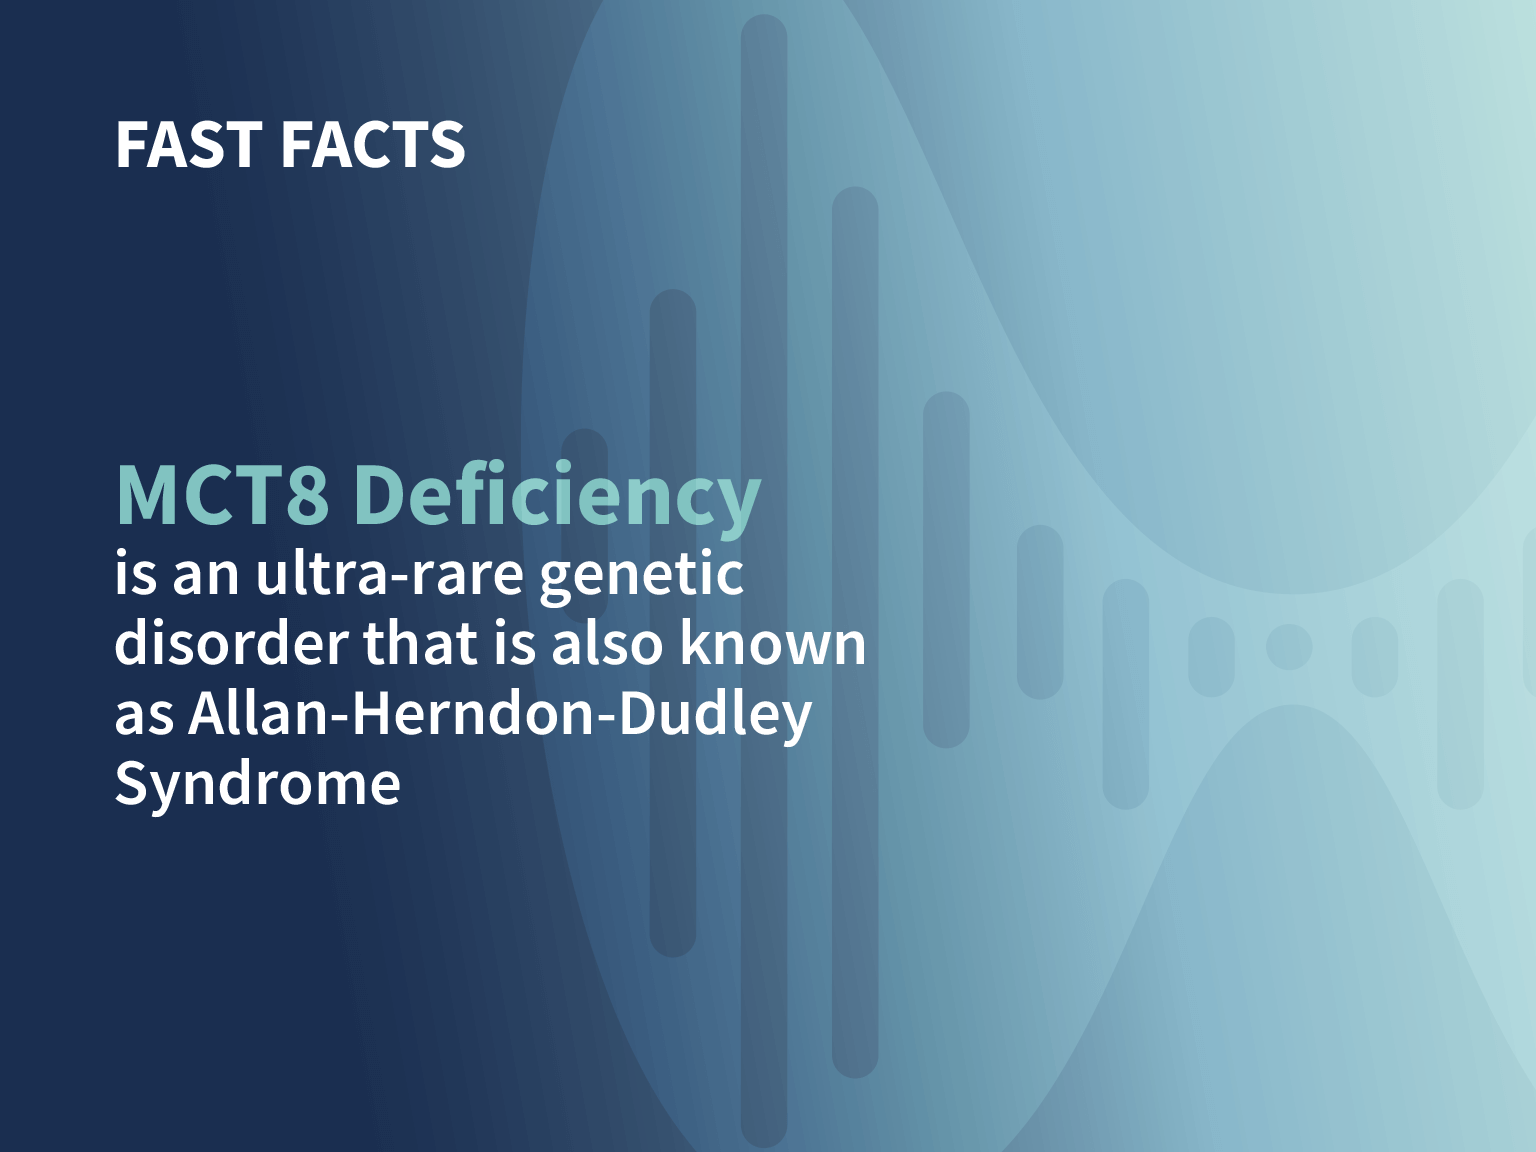 MCT8 Deficiency is an ultra-rare genetic disorder that is also known as Allan-Herndon-Dudley Syndrome